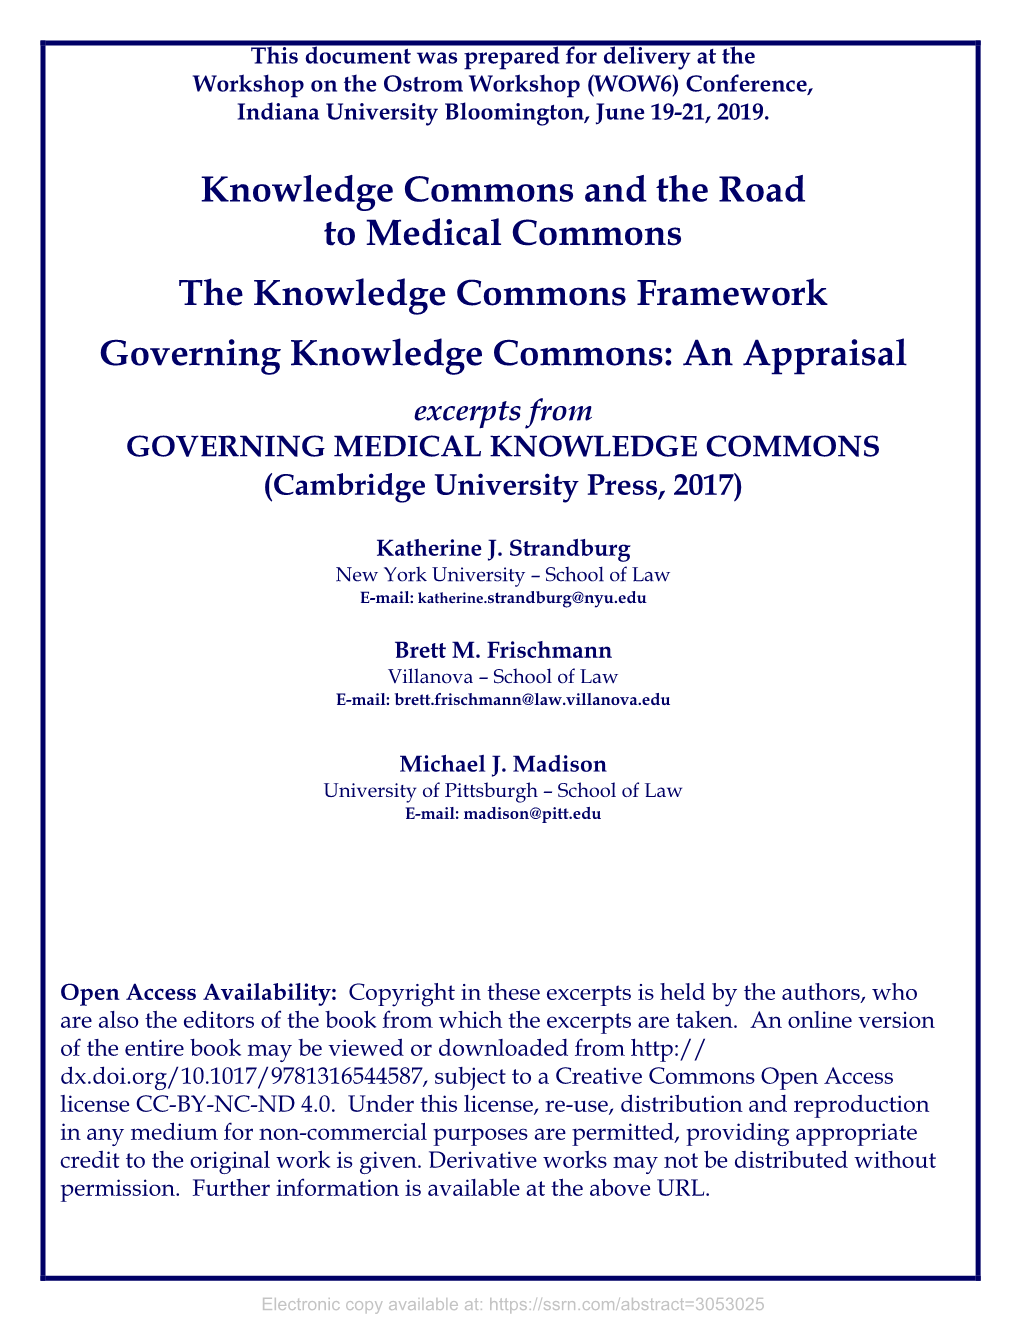 Knowledge Commons and the Road To